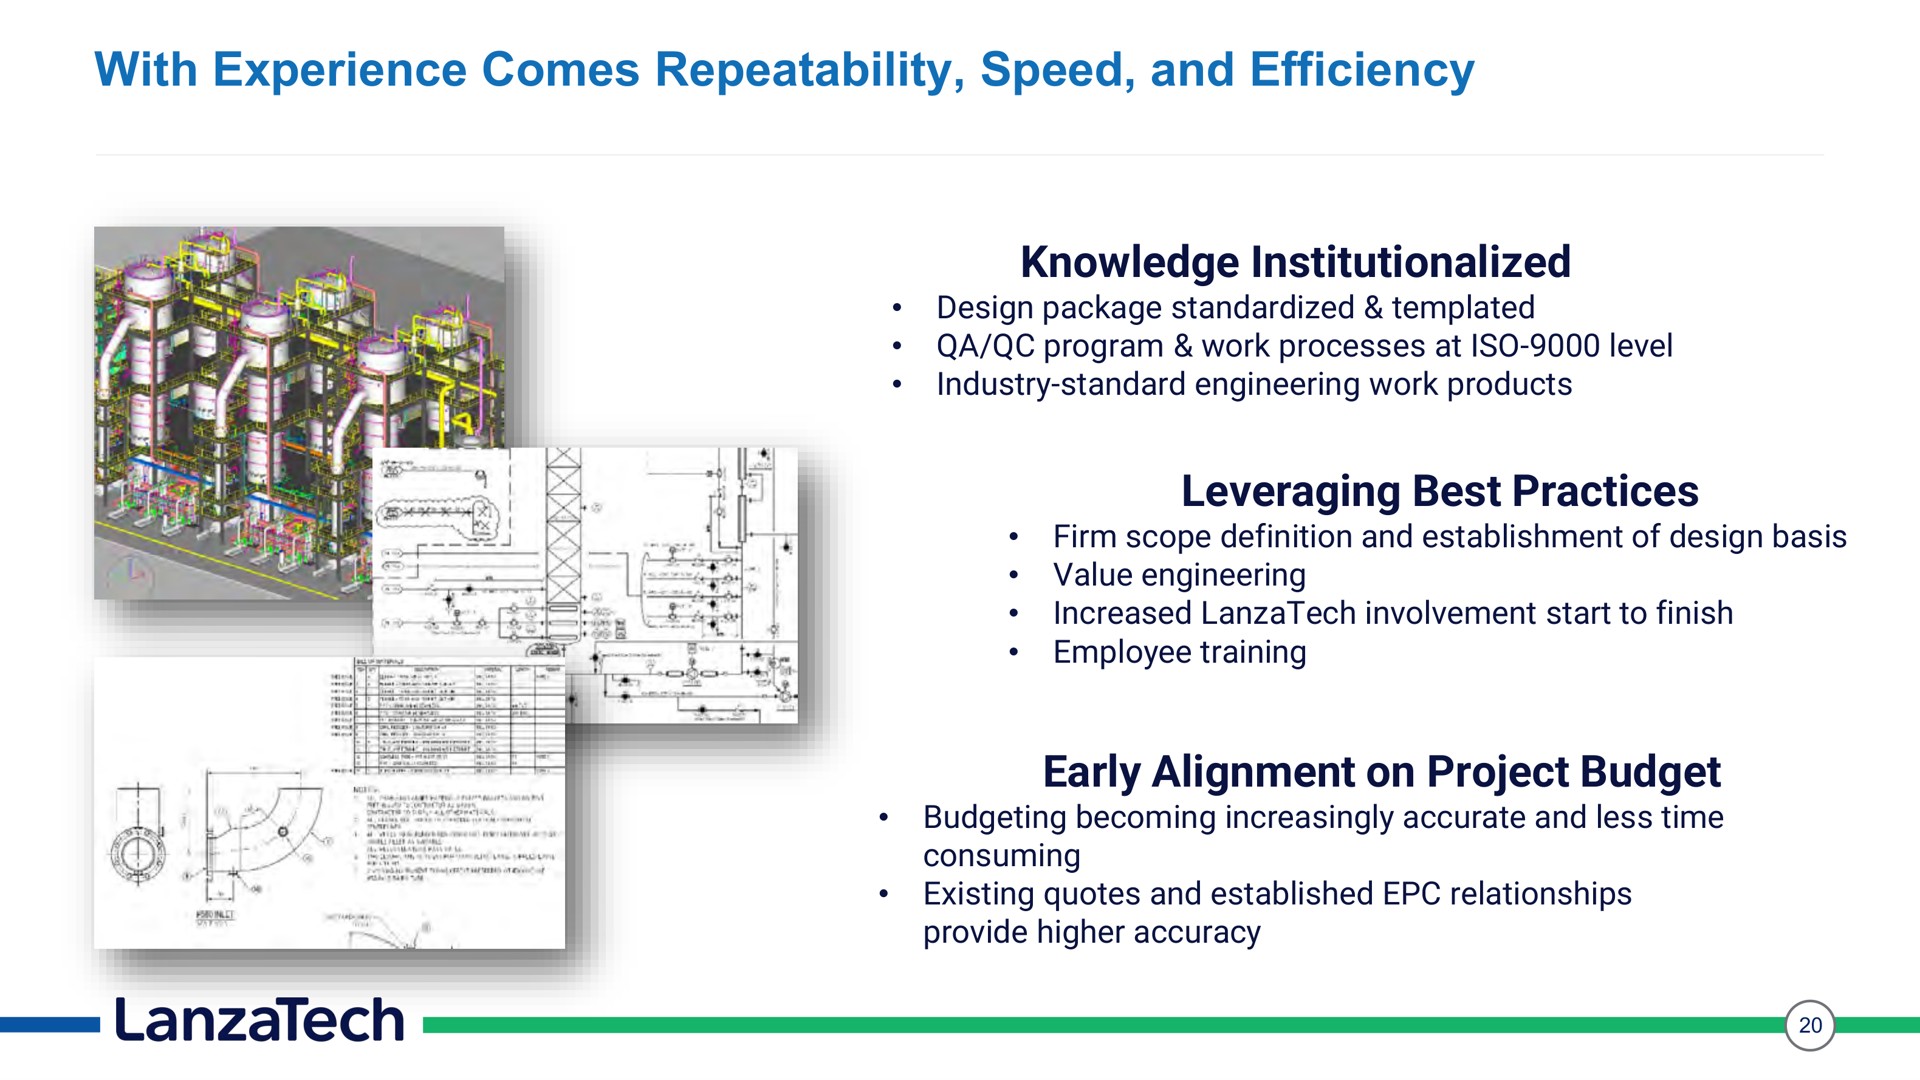 with experience comes repeatability speed and efficiency knowledge institutionalized leveraging best practices early alignment on project budget | LanzaTech